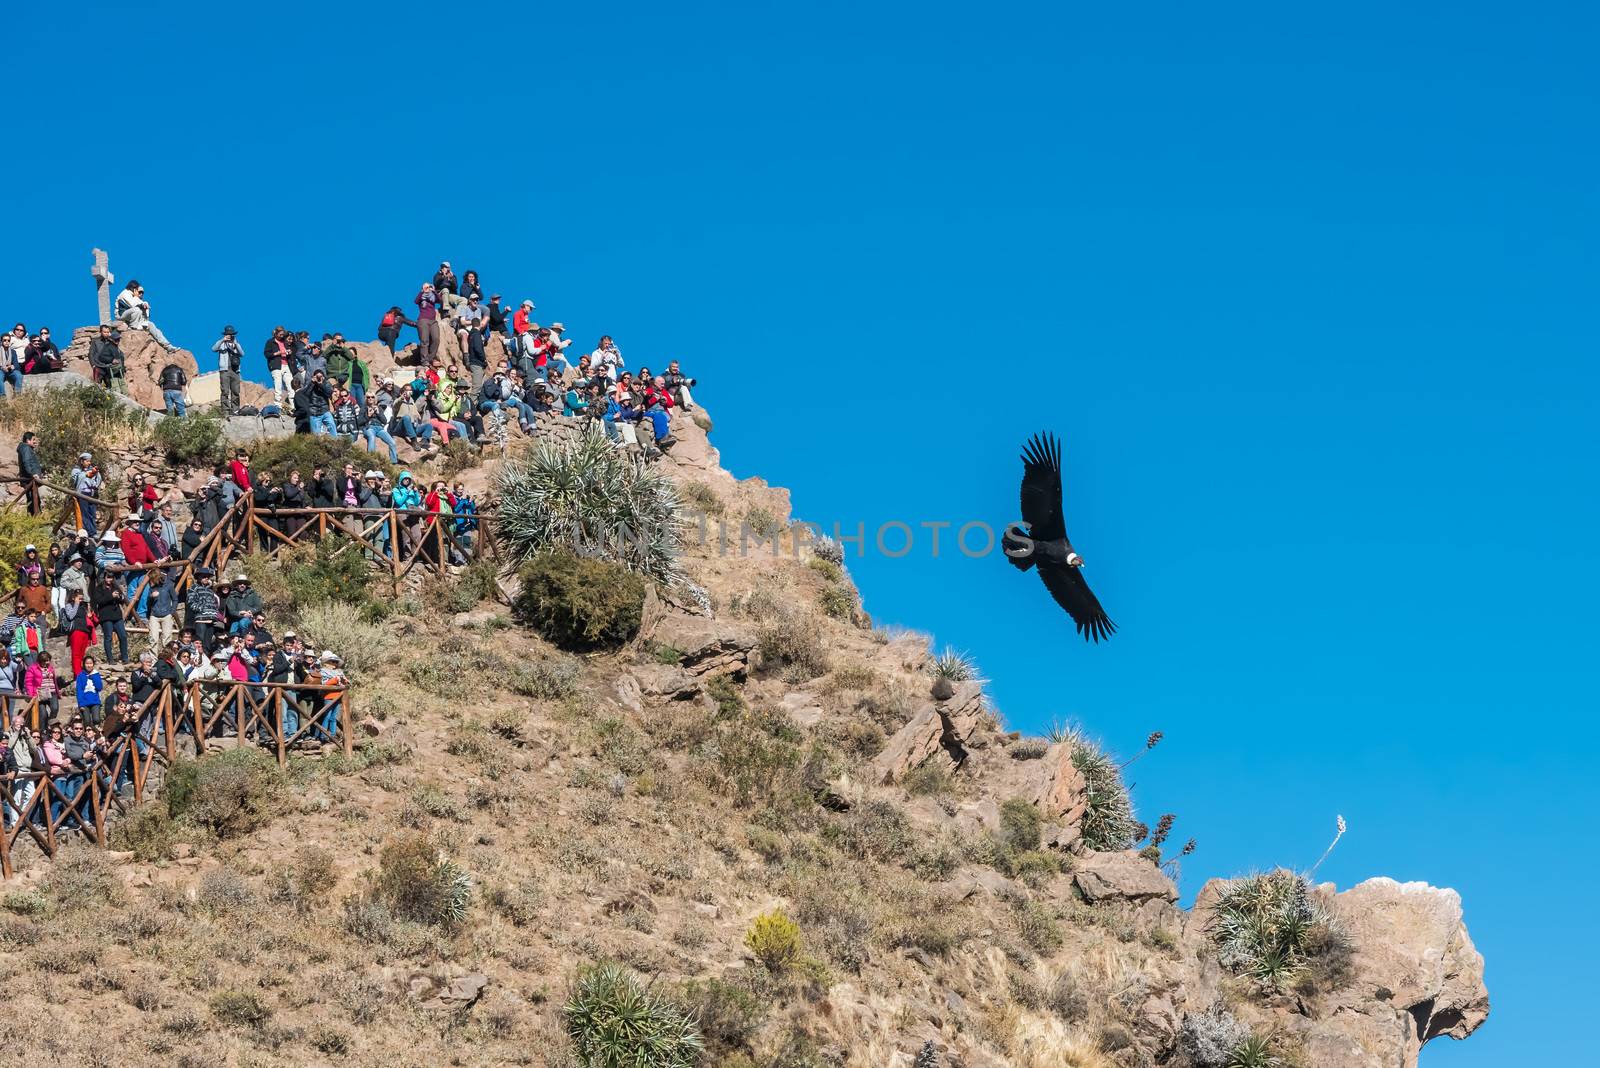 Arequipa, Peru - July 30, 2013: tourists watching condors in the Colca Canyon at Arequipa Peru on july 30th, 2013